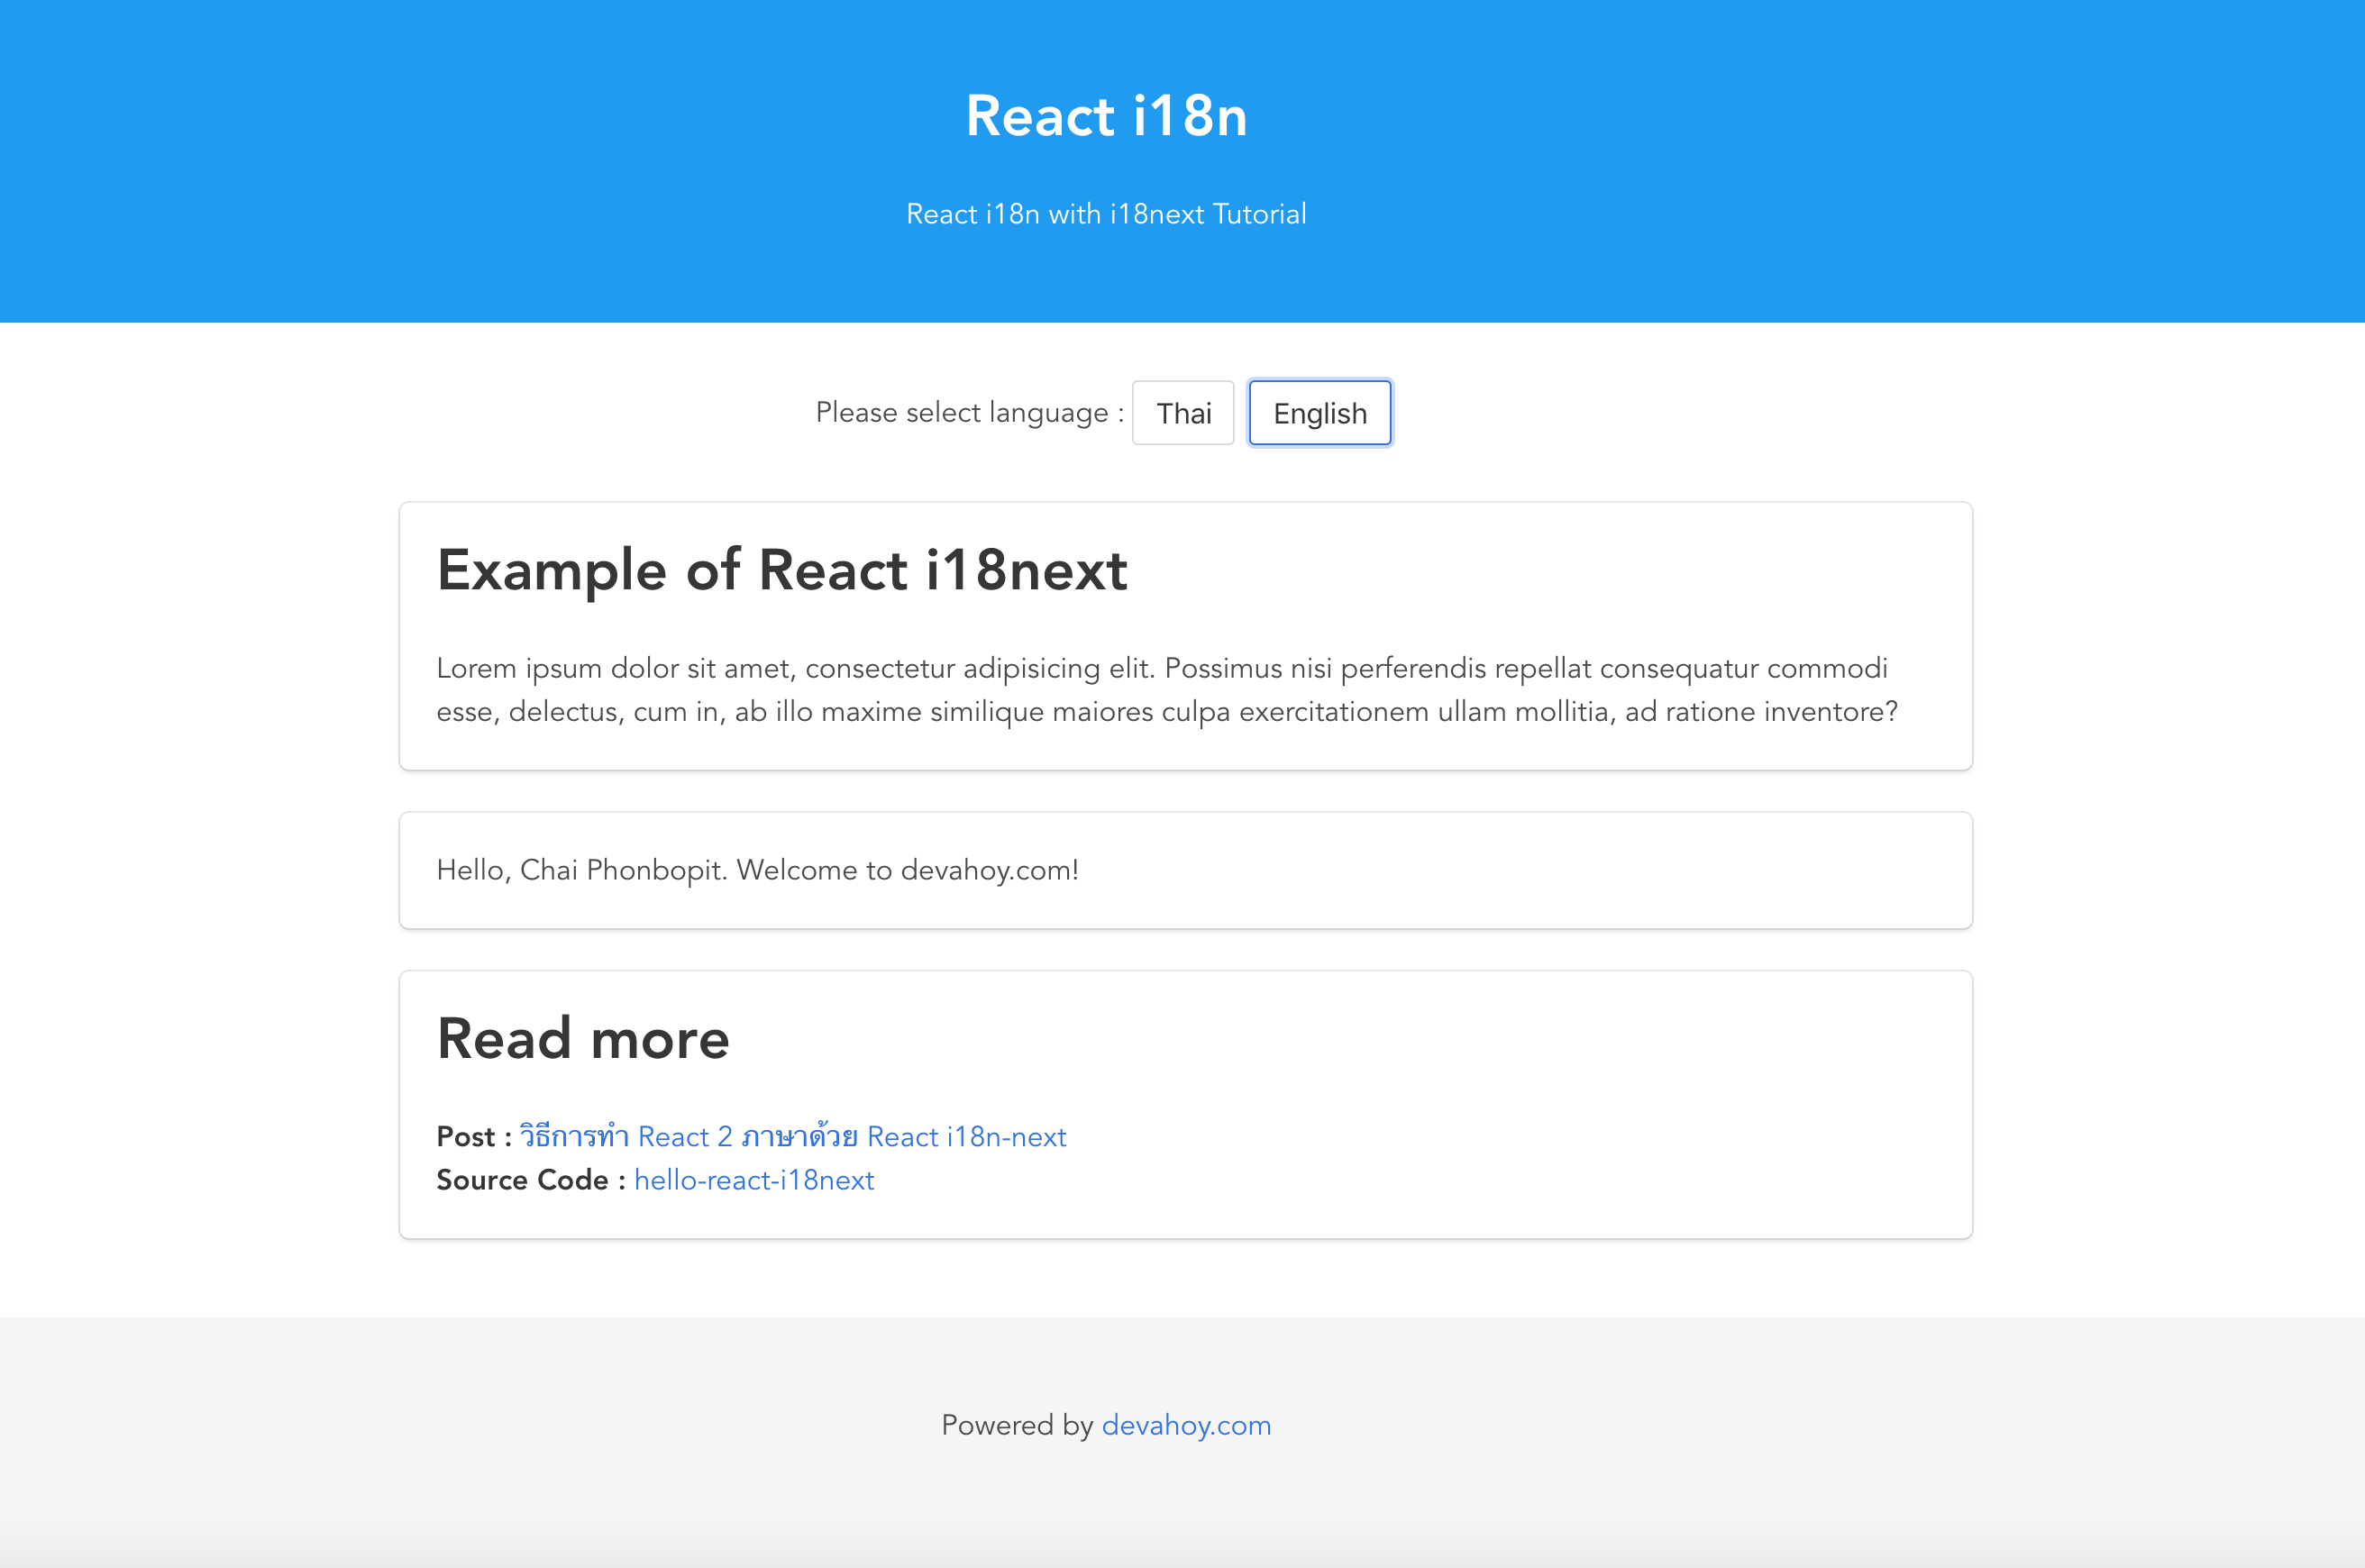 2018/04/getting-started-with-react-i18next